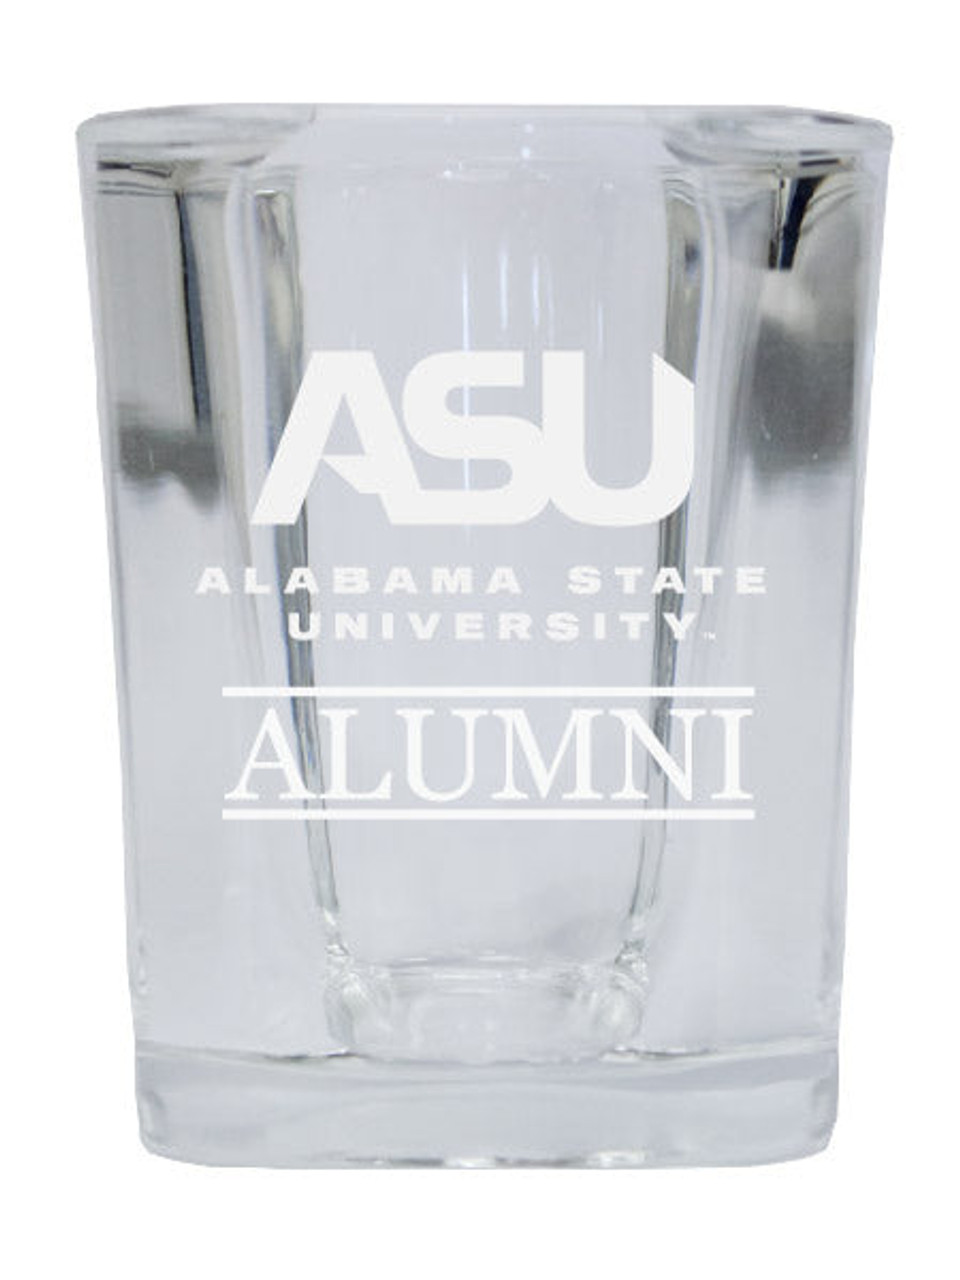 Alabama State University College Alumni 2 Ounce Square Shot Glass laser etched